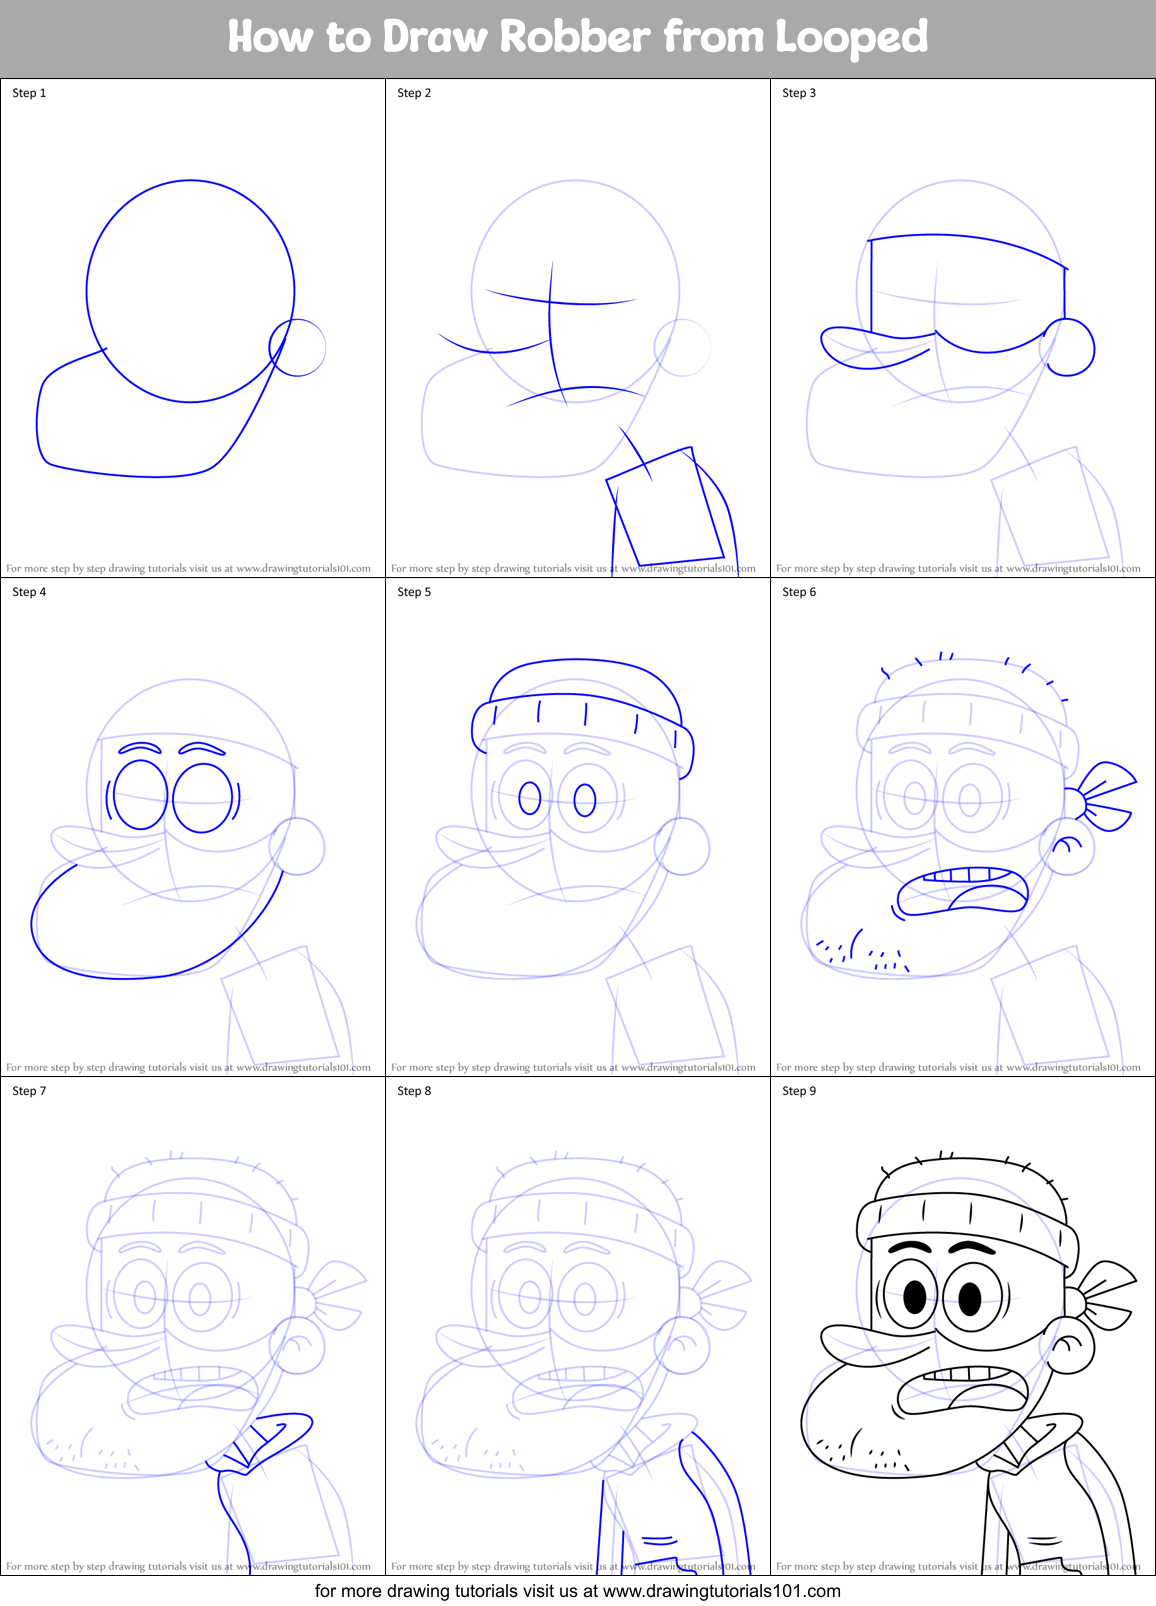 How to Draw Robber from Looped printable step by step drawing sheet